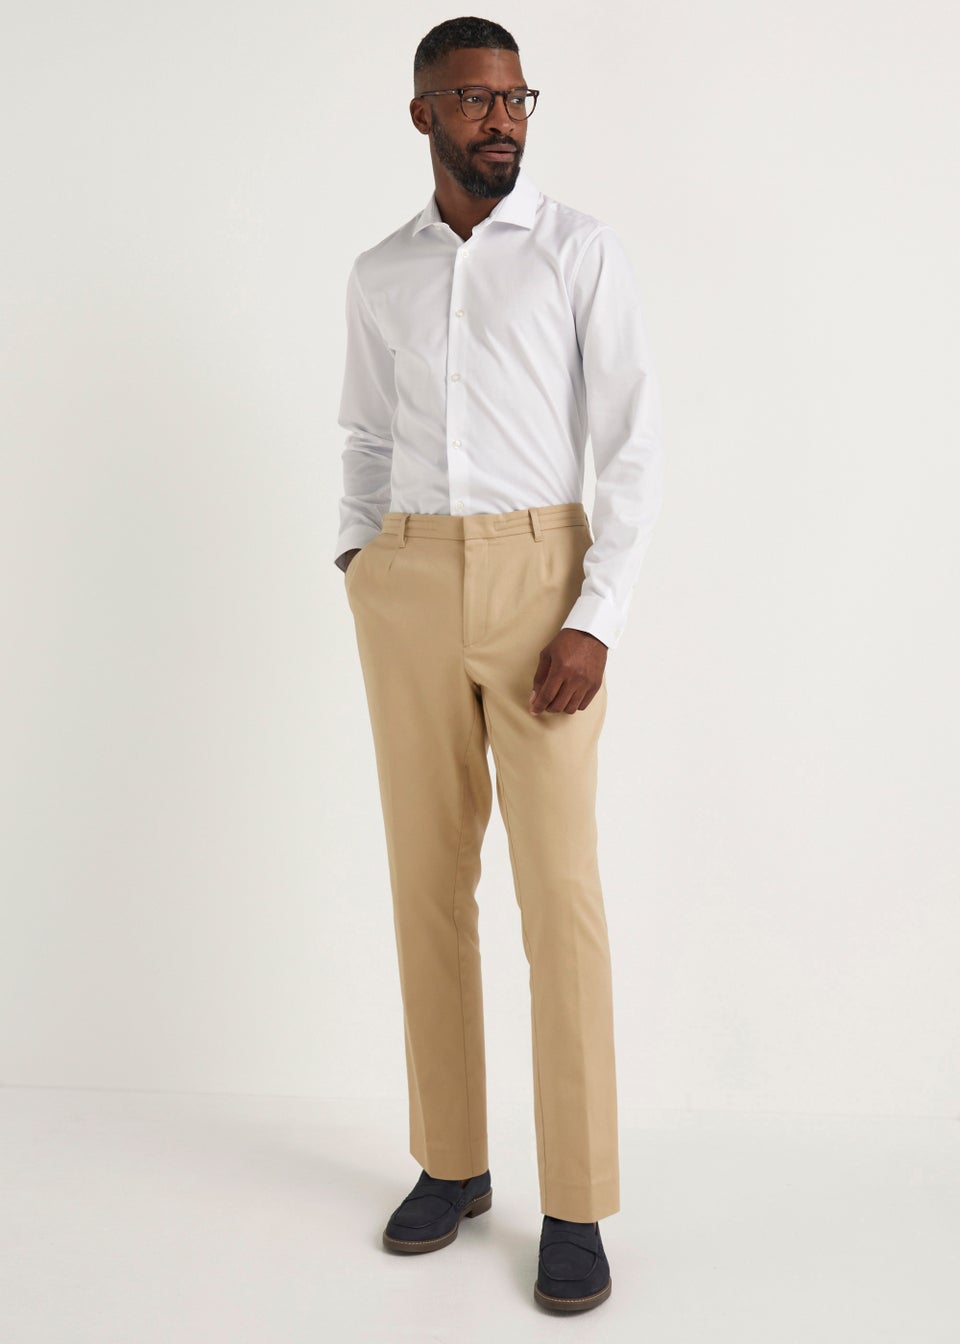 antydning tabe Uafhængighed Taylor & Wright Stone Satin Slim Fit Chinos - Matalan